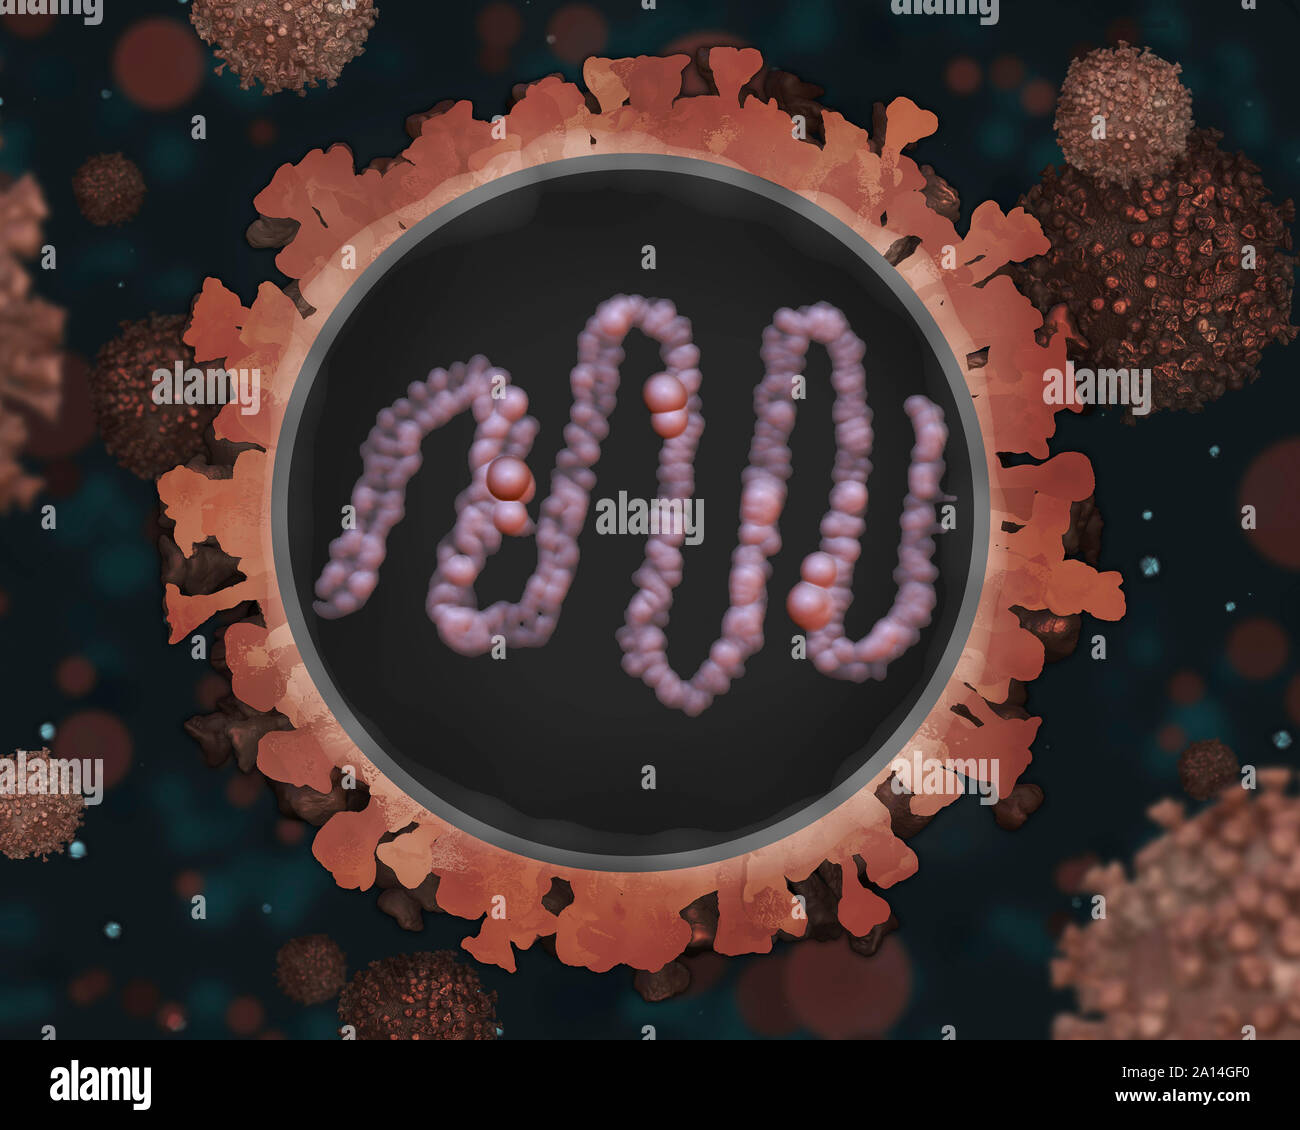 Medical illustration of measles virus in an environment. Stock Photo